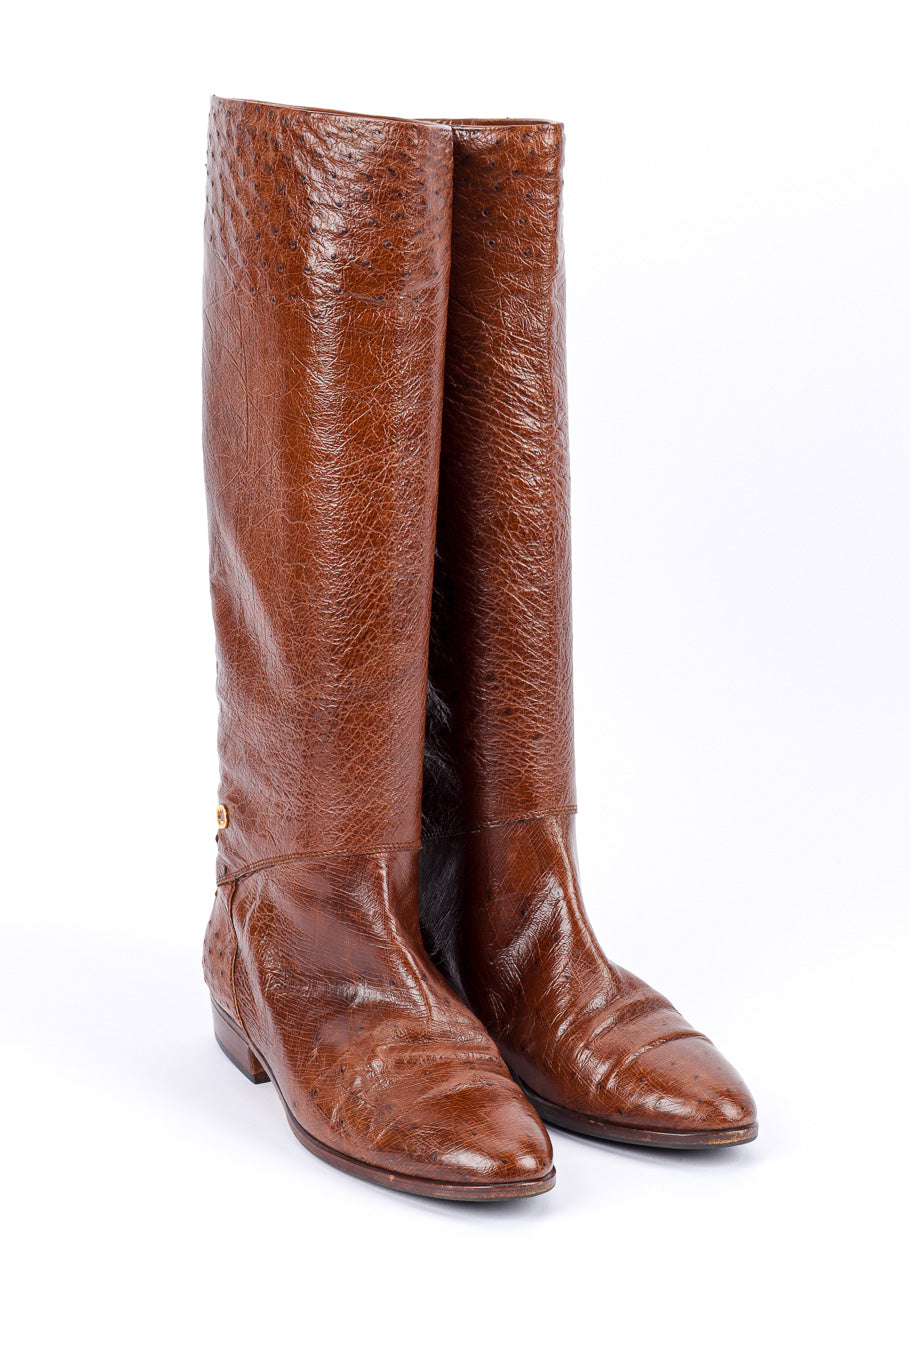 Vintage Gucci Brown Ostrich Leather Riding Boot 3/4 front view @recessla